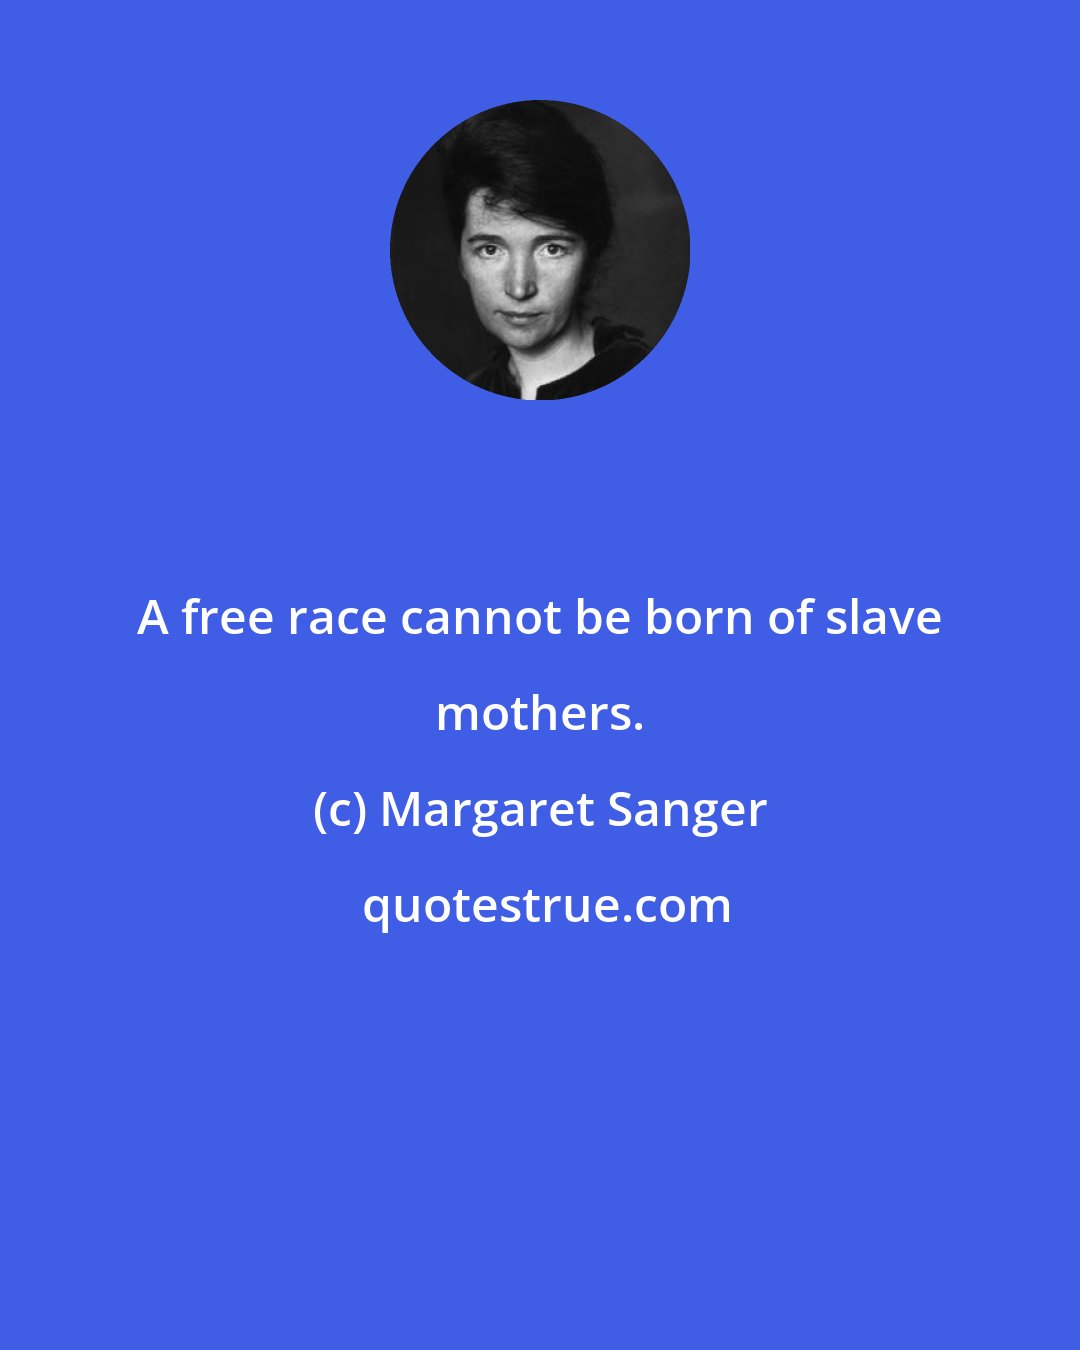 Margaret Sanger: A free race cannot be born of slave mothers.